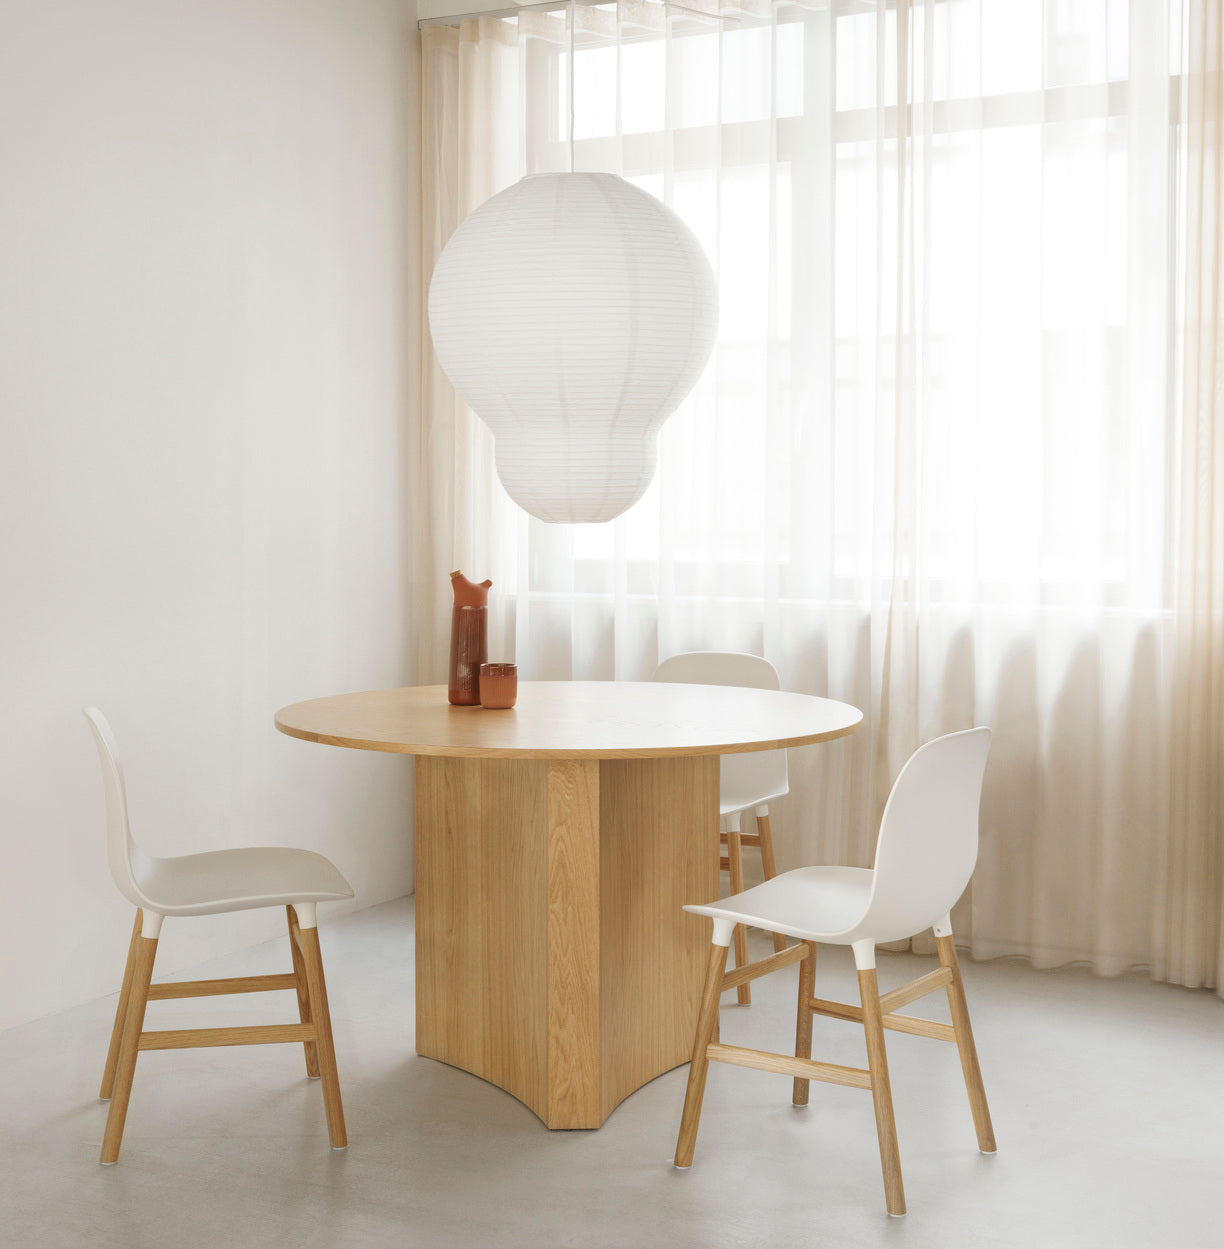 Normann Copenhagen Form Chair Wood at someday designs. #colour_white